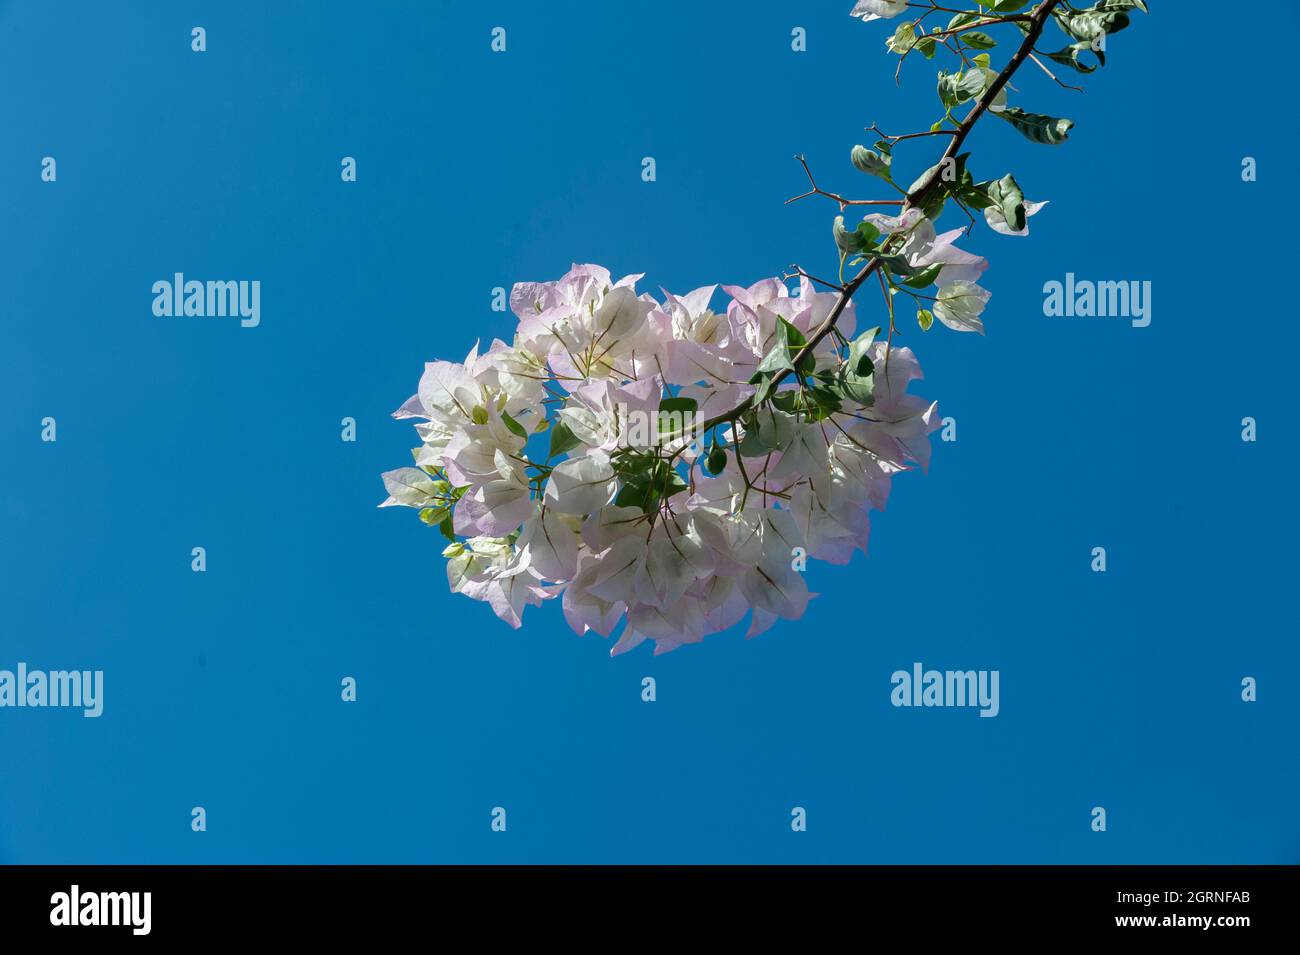 Flower branch on blue background Stock Photo